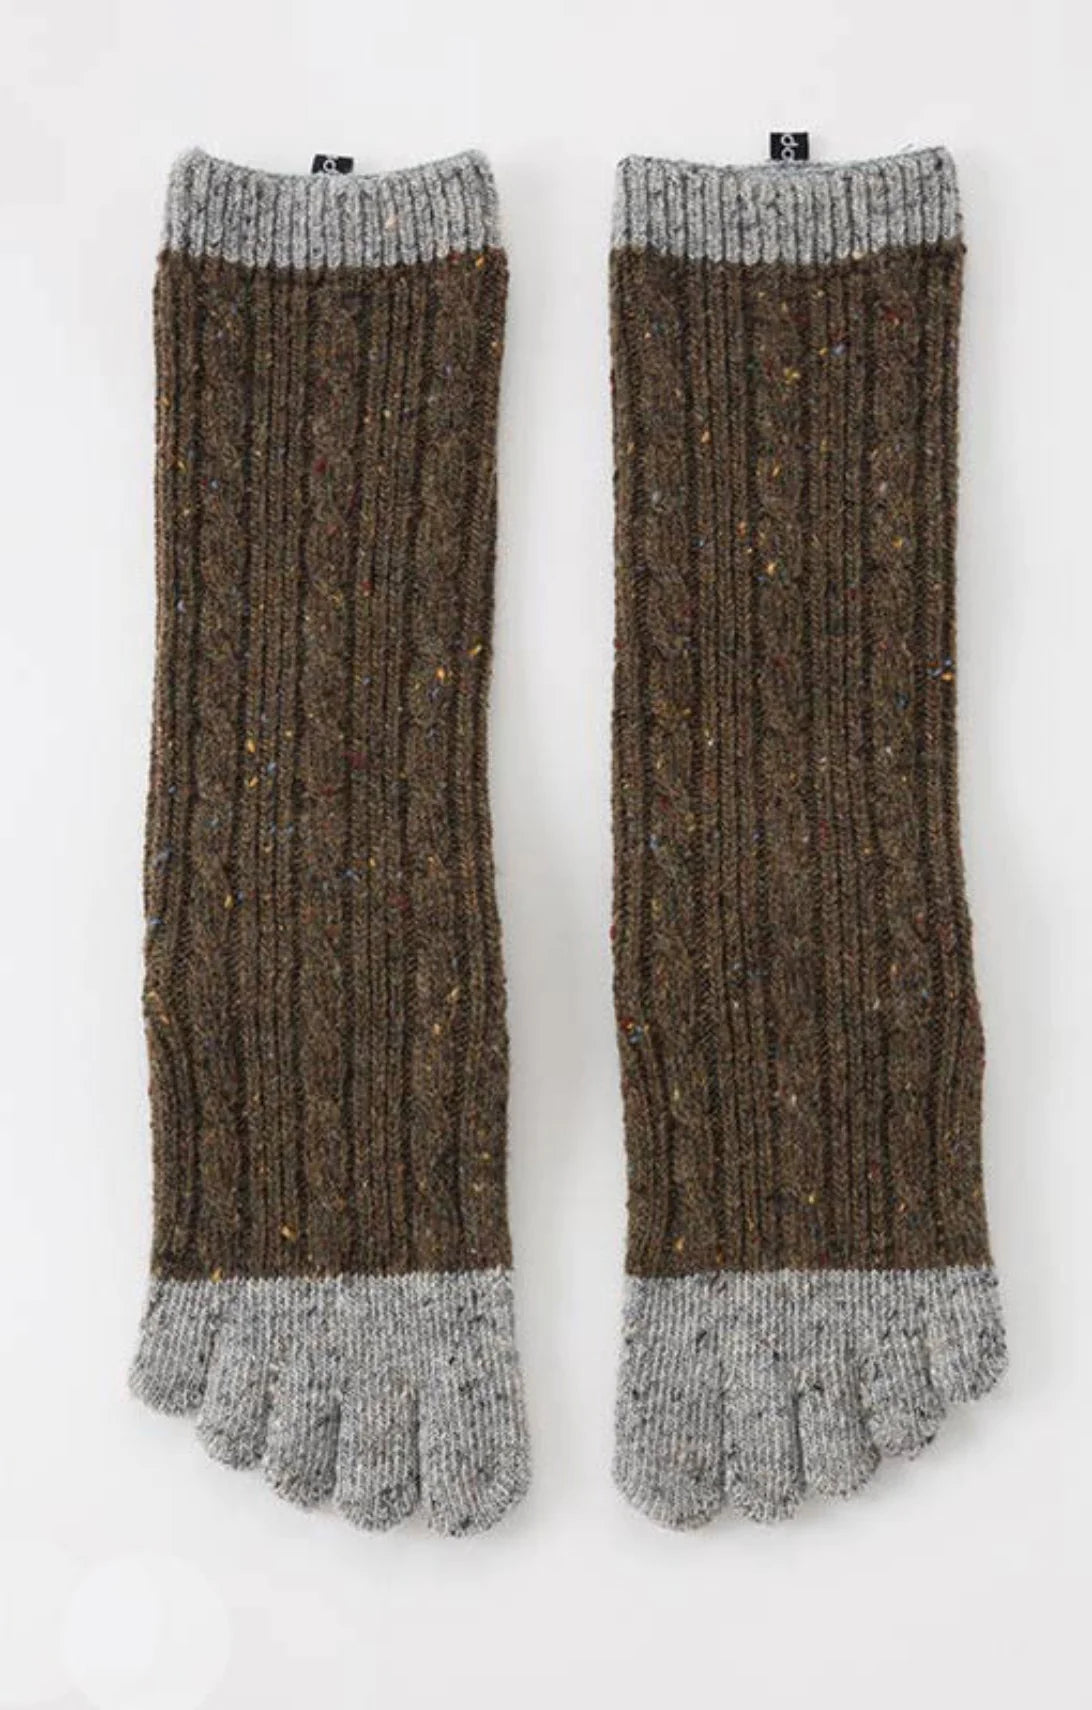 Knitido plus's Wool Blend Cable Confetti Midcalf Socks in Olive color